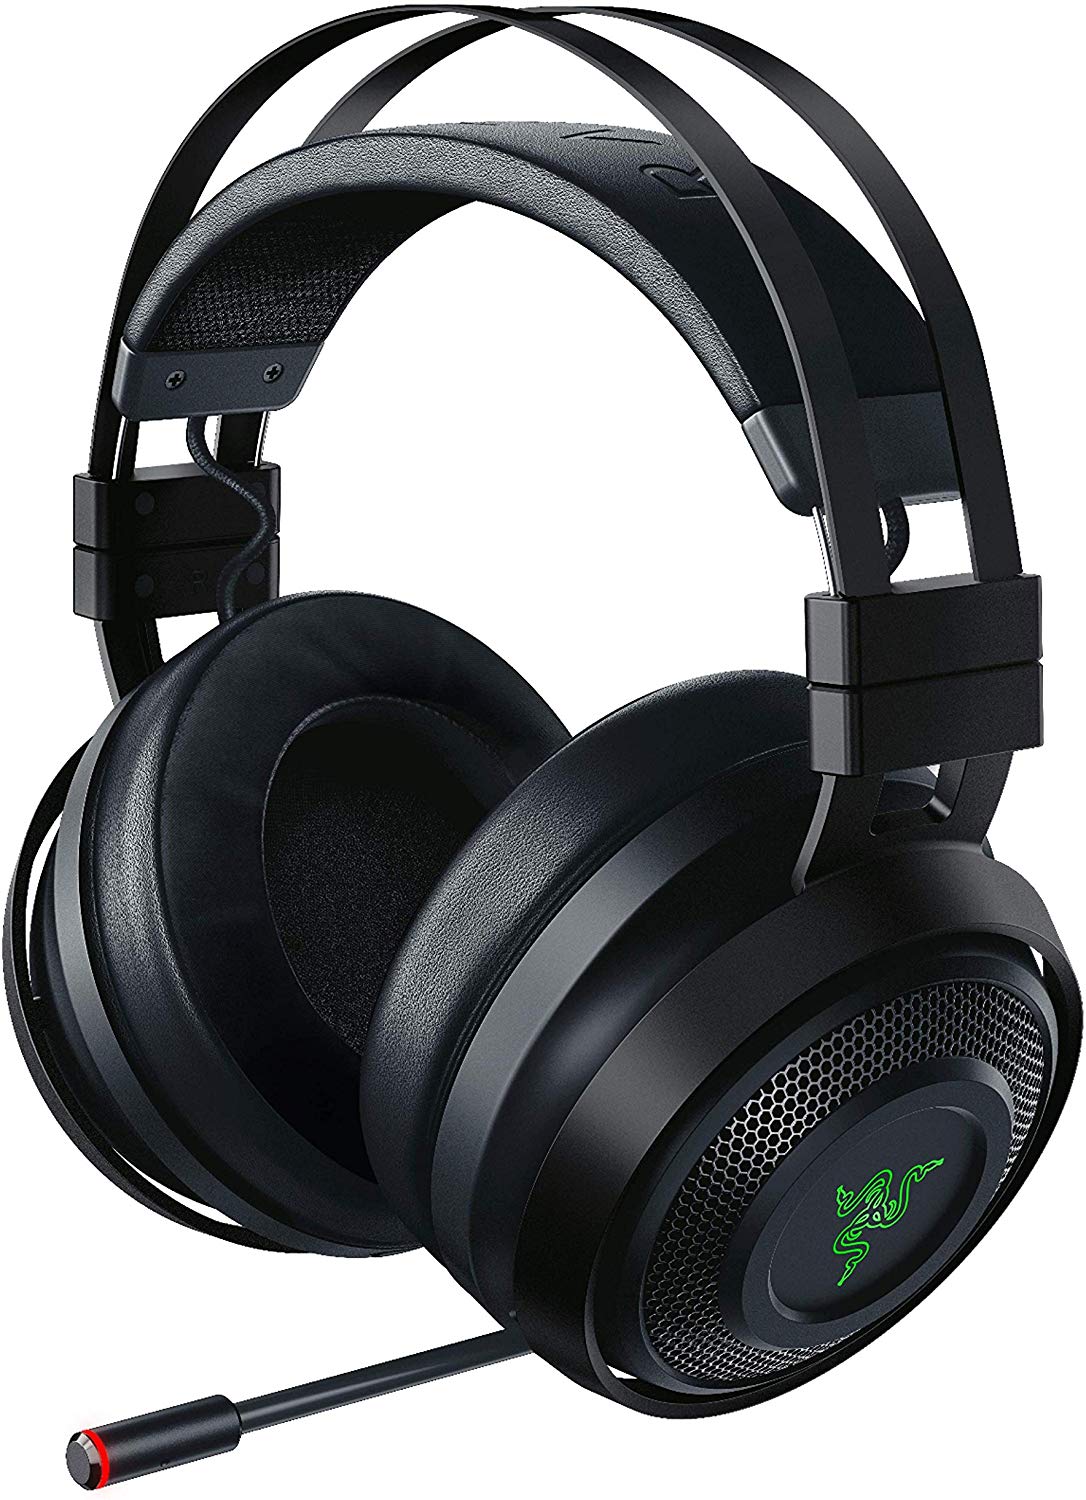 The 8 Best Razer Headsets in 2021 - Reviews and Comparison